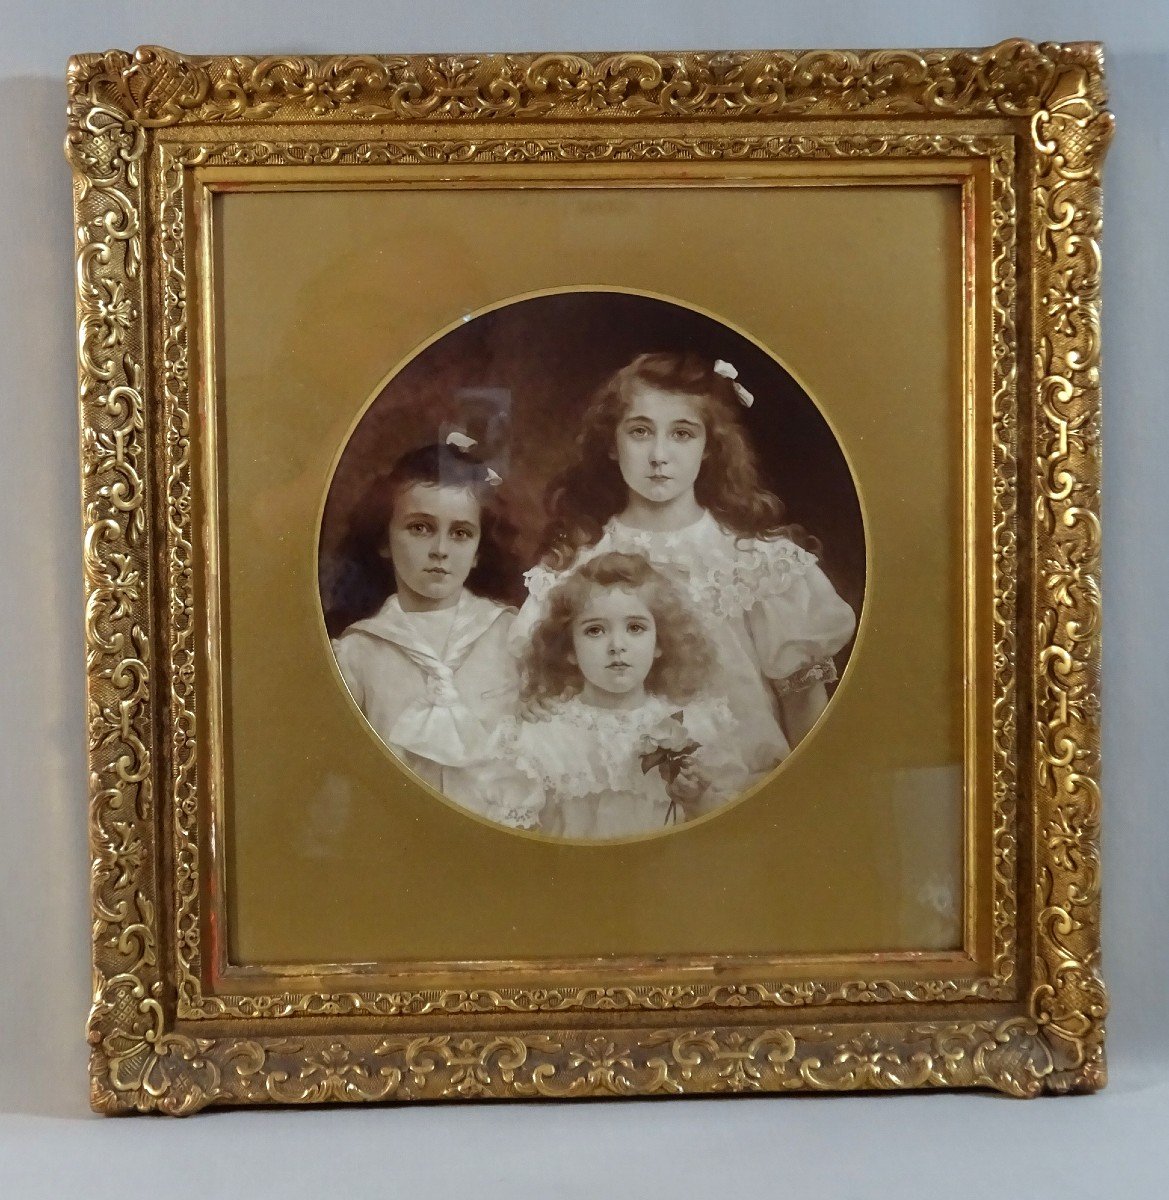 19th Century Frame, Wood And Stucco Gilded With Gold Leaf, Portrait Of Three Young Sisters-photo-1